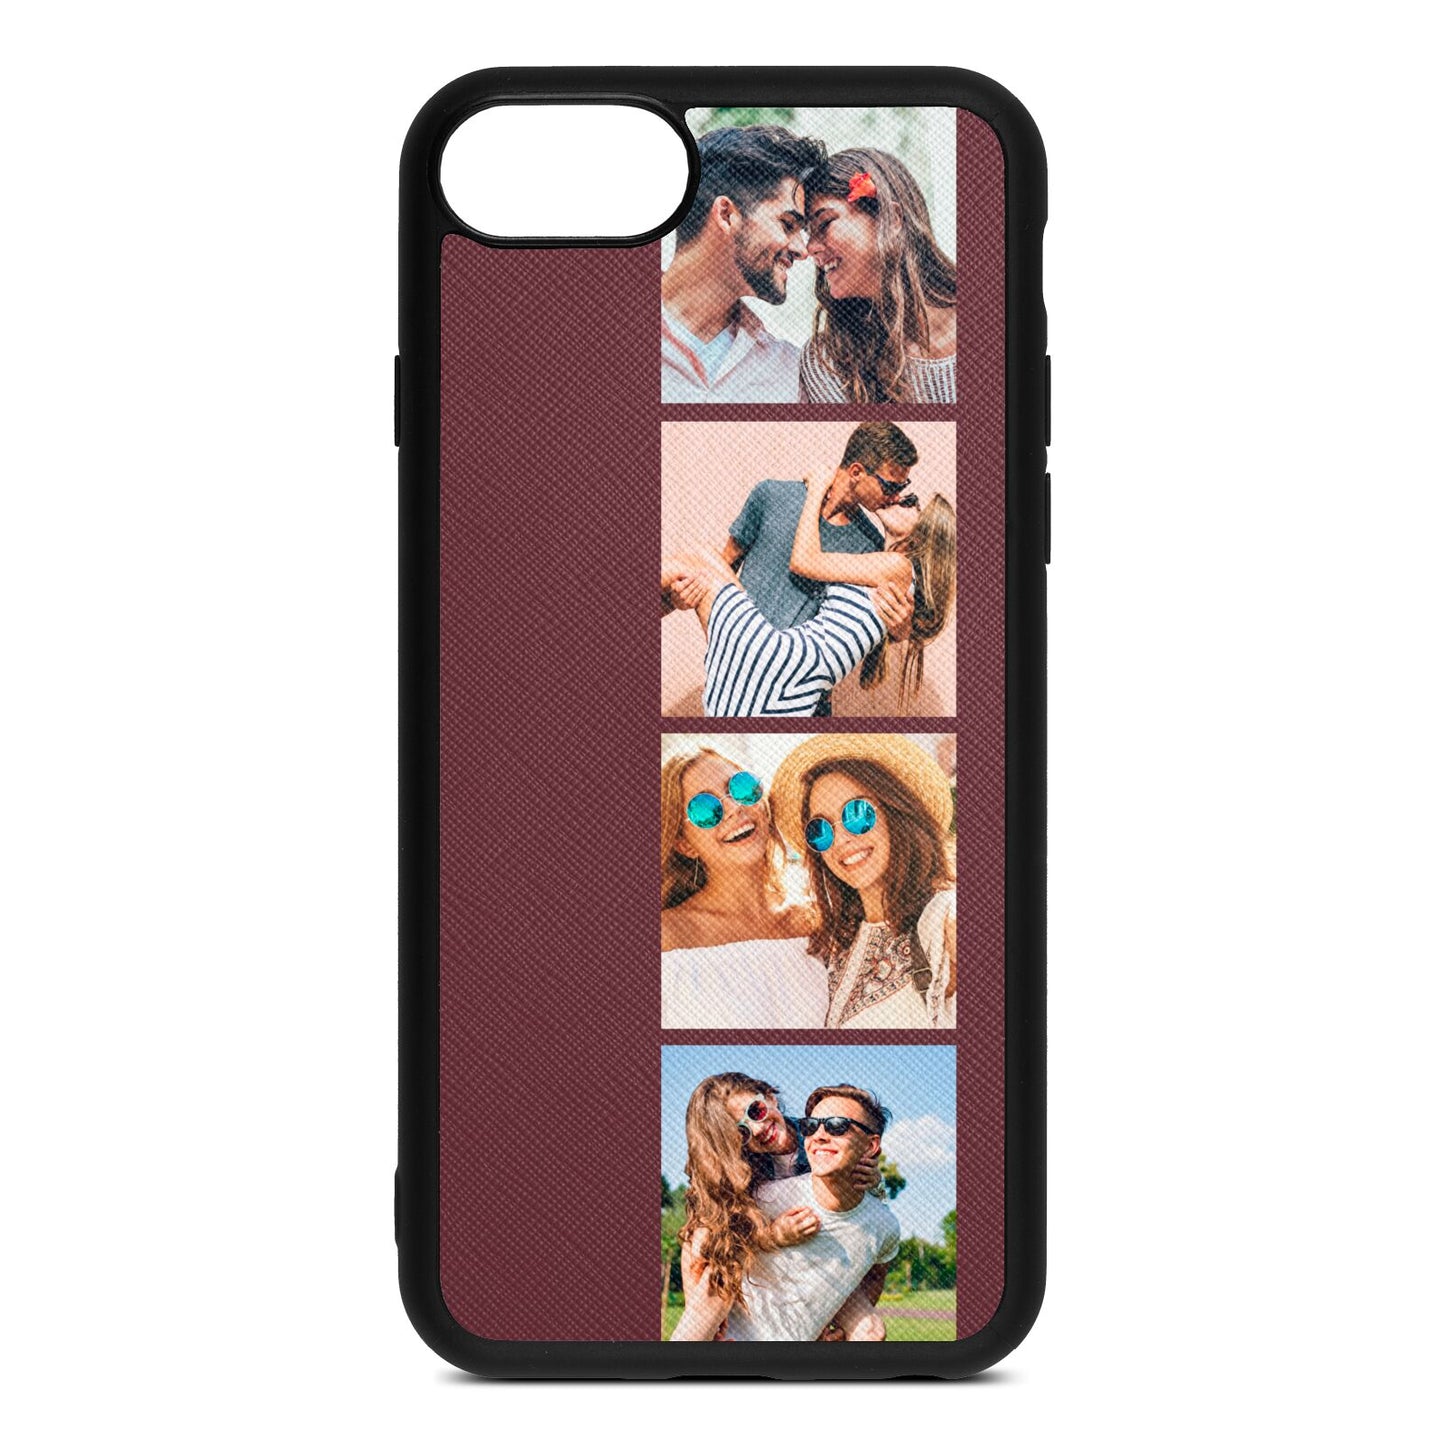 Photo Strip Montage Upload Rose Brown Saffiano Leather iPhone 8 Case